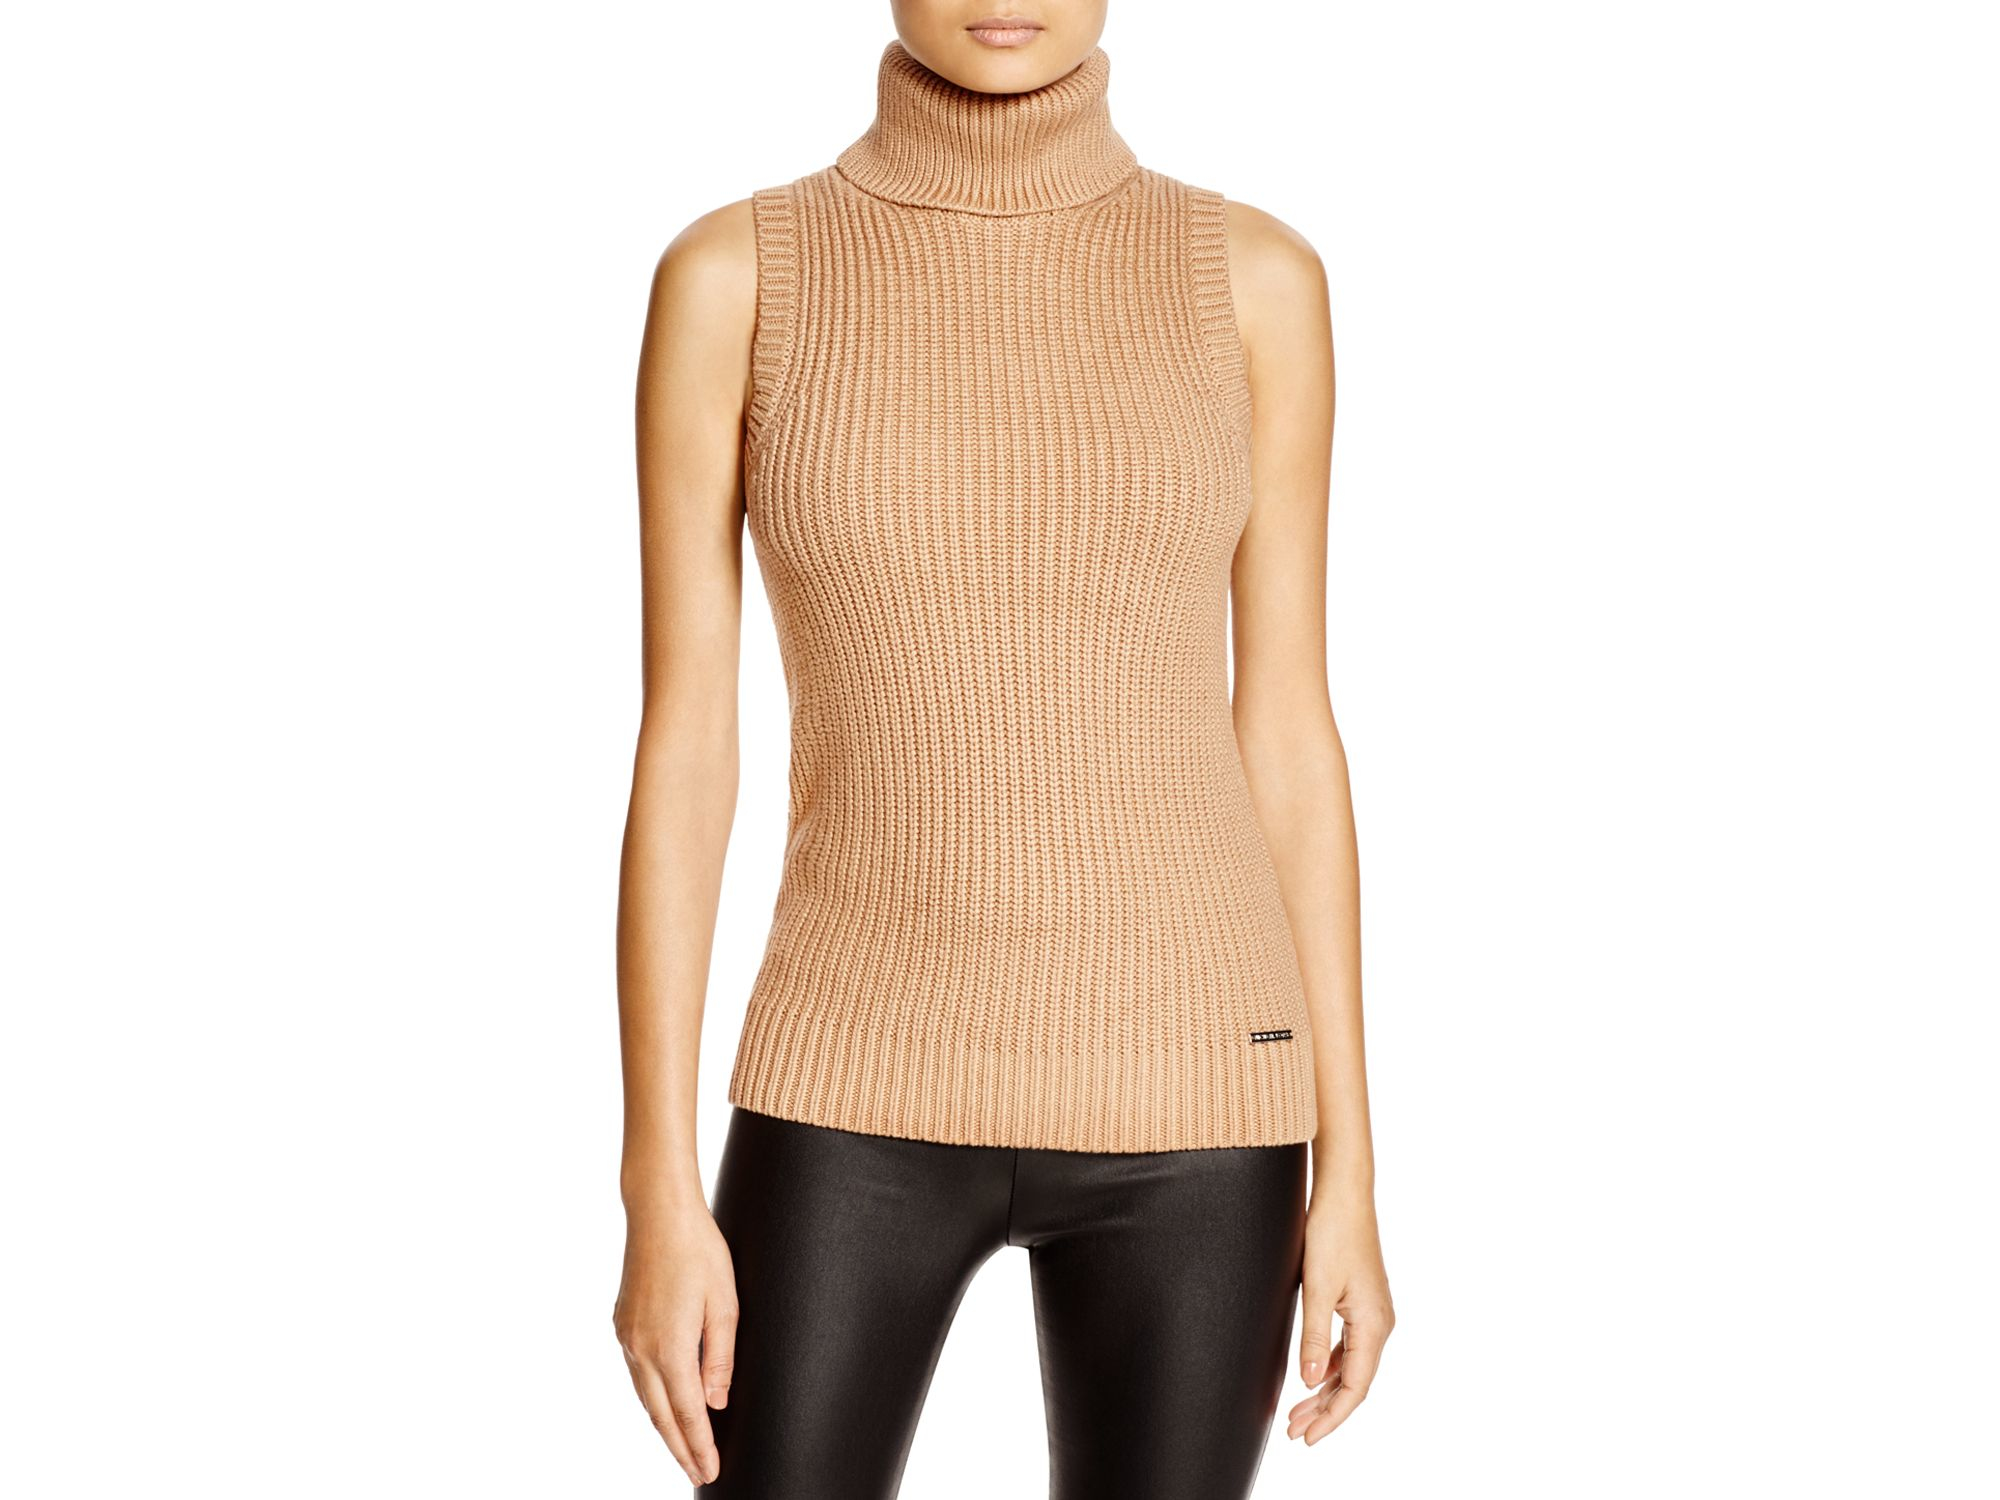 Michael Kors Sleeveless Cashmere Knit Turtleneck Top in Black Womens Clothing Jumpers and knitwear Turtlenecks 